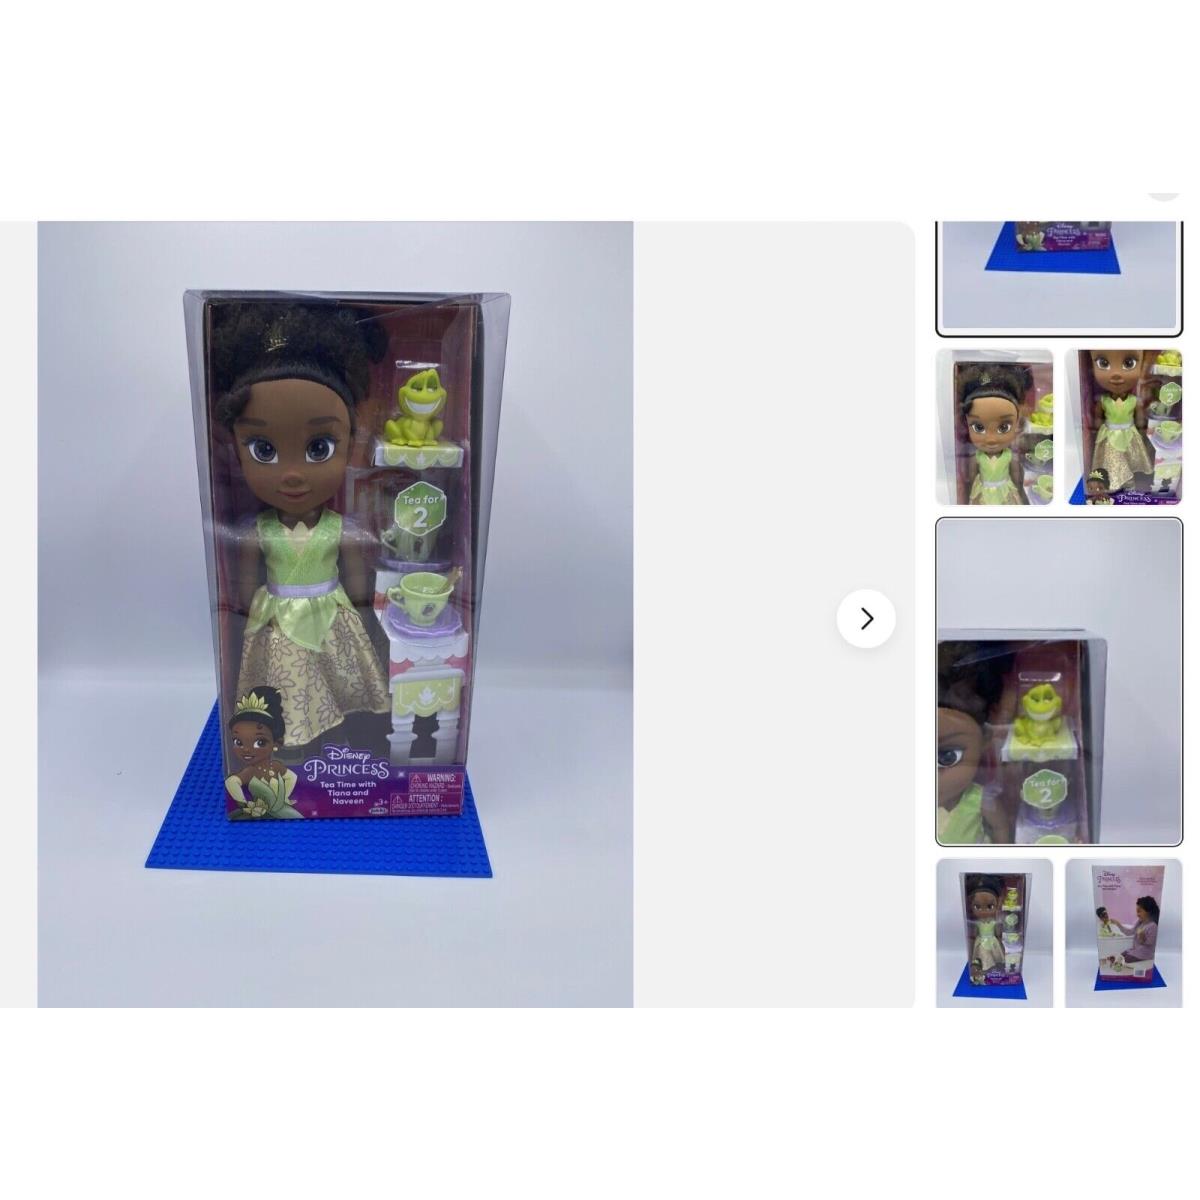 Disney Princess Tea Time For Two with 14 Inch Doll Pet - Pick Your Favorite Tiana & Naveen